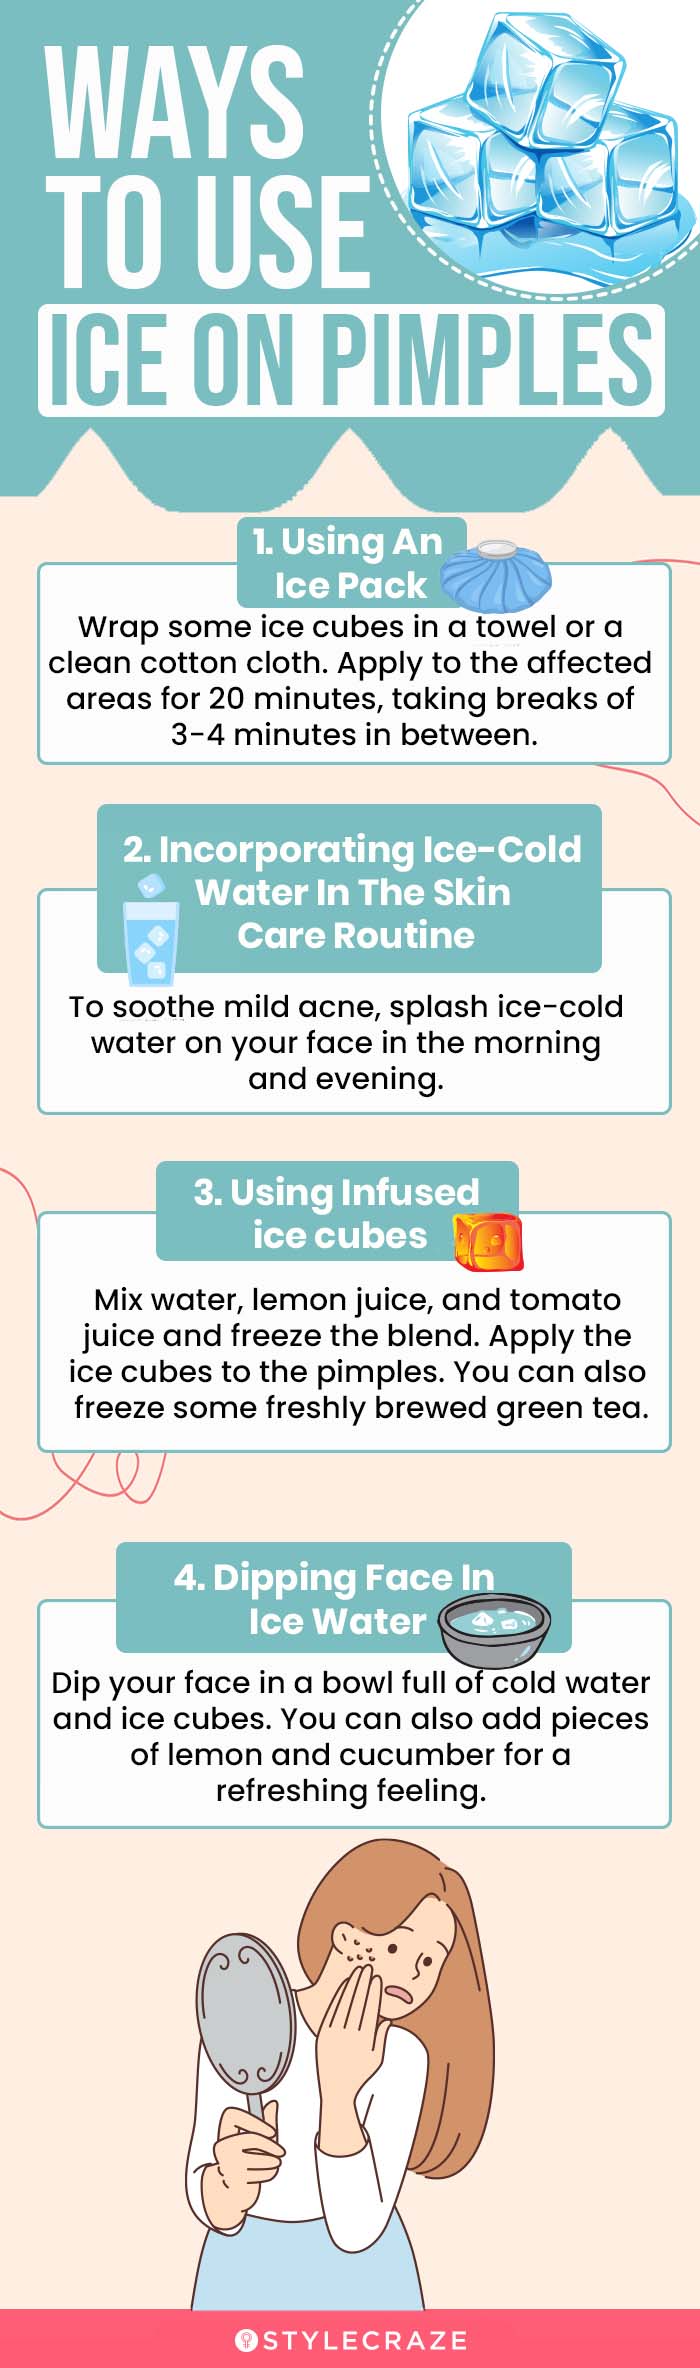 ways to use ice on pimples (infographic) 